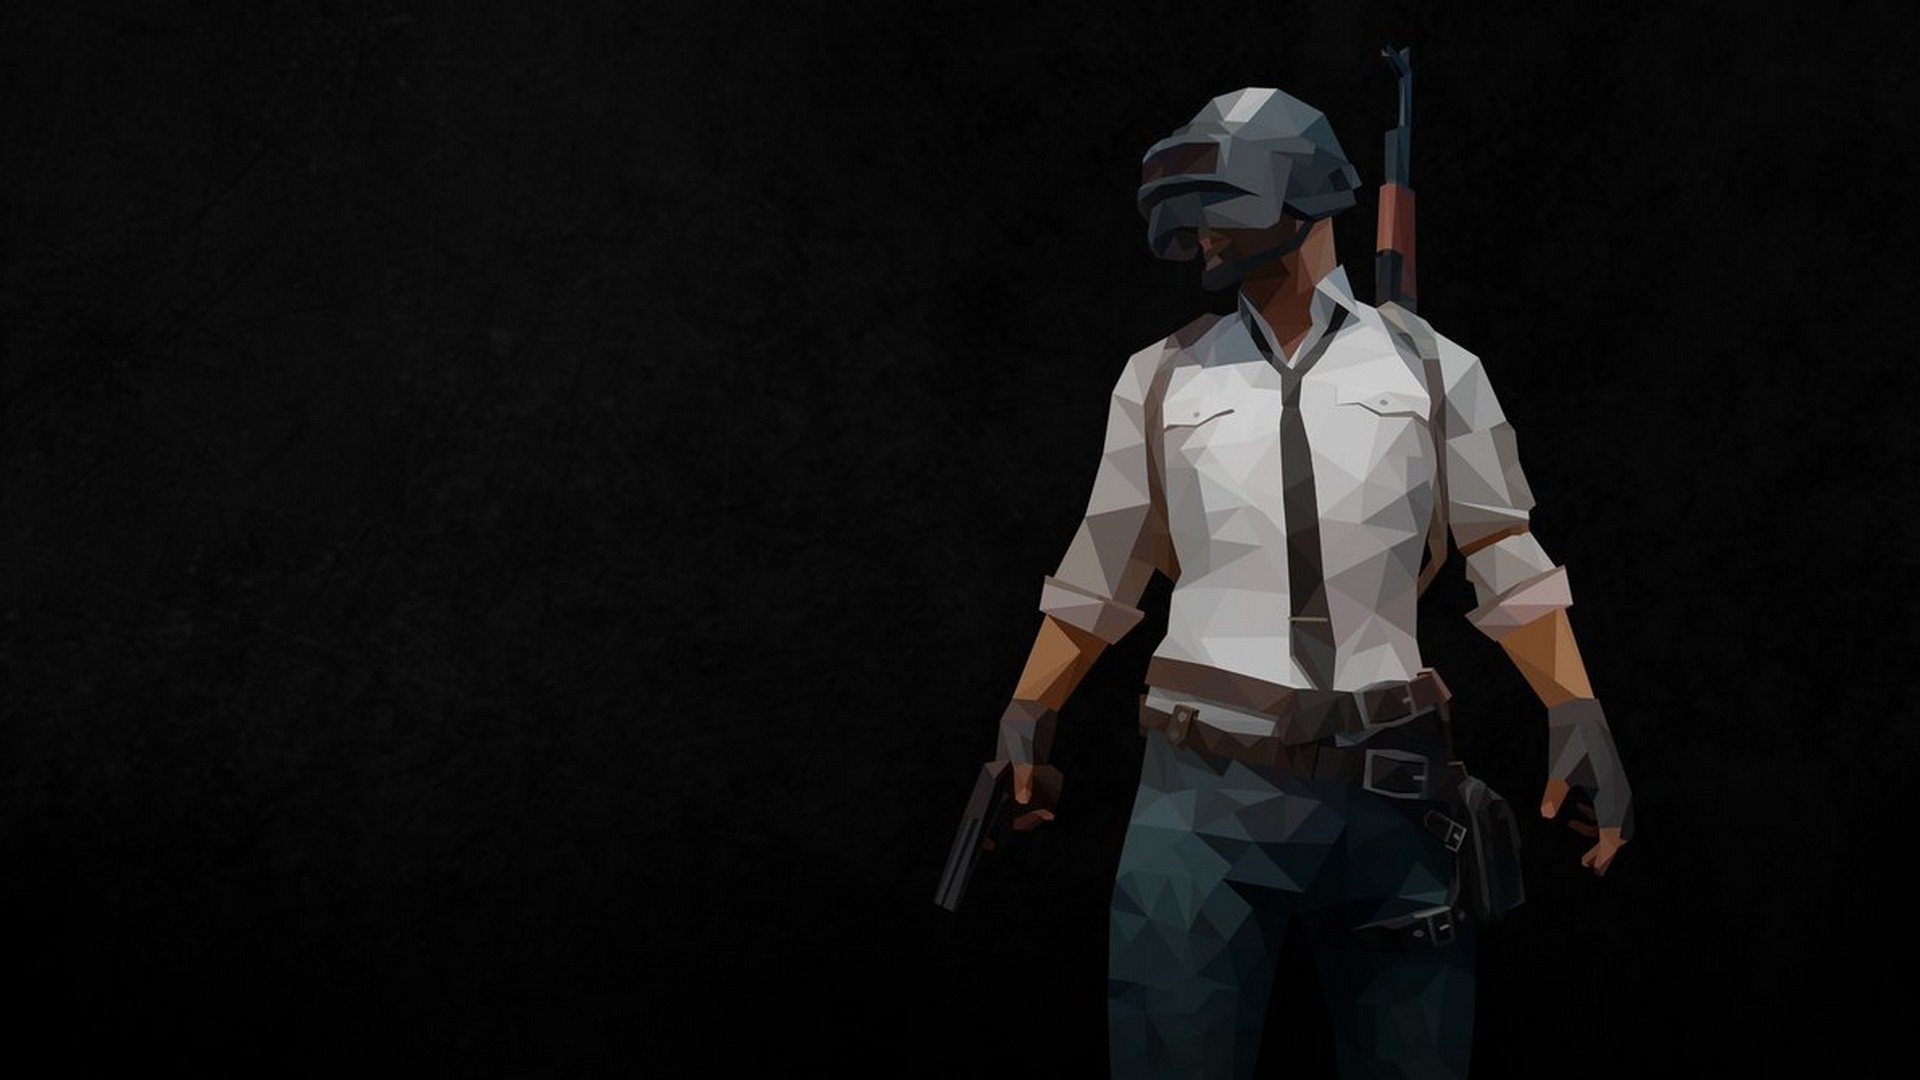 1920x1080 PUBG Update Xbox One Wallpaper with image resolution  pixel. You  can use this wallpaper